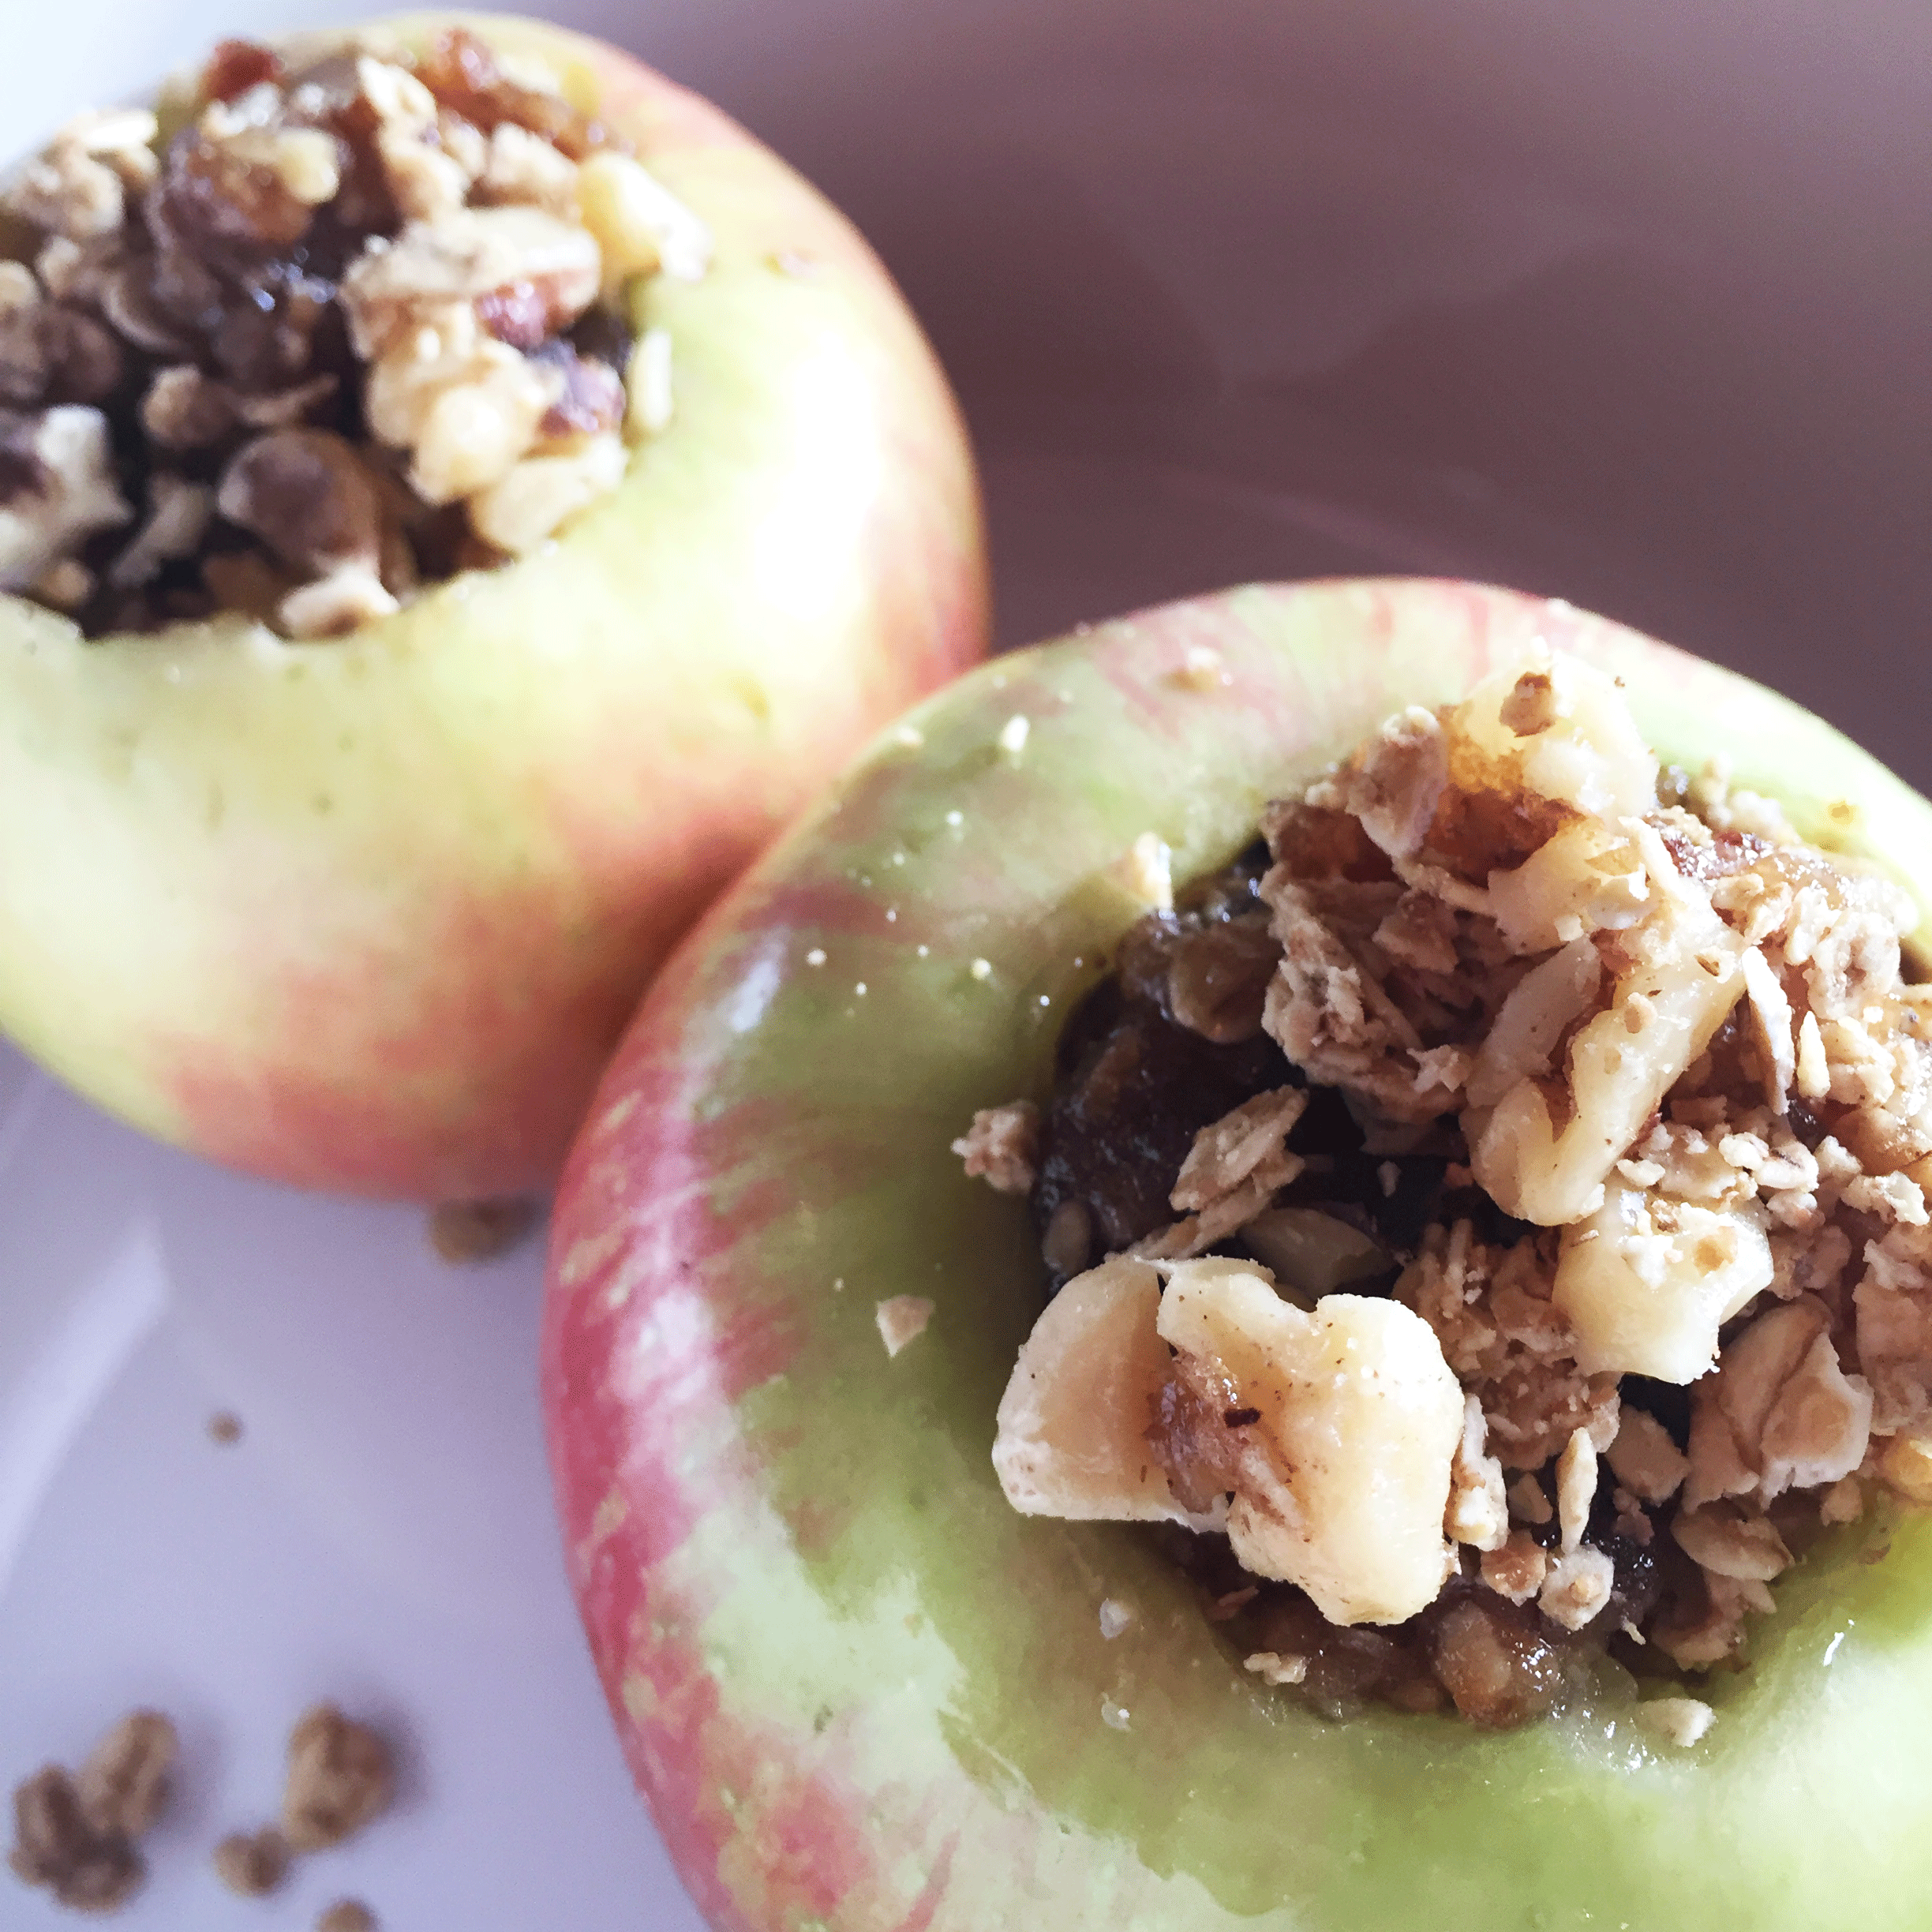 Baked Apples Filled with Oatmeal, Dates, and Brown Sugar